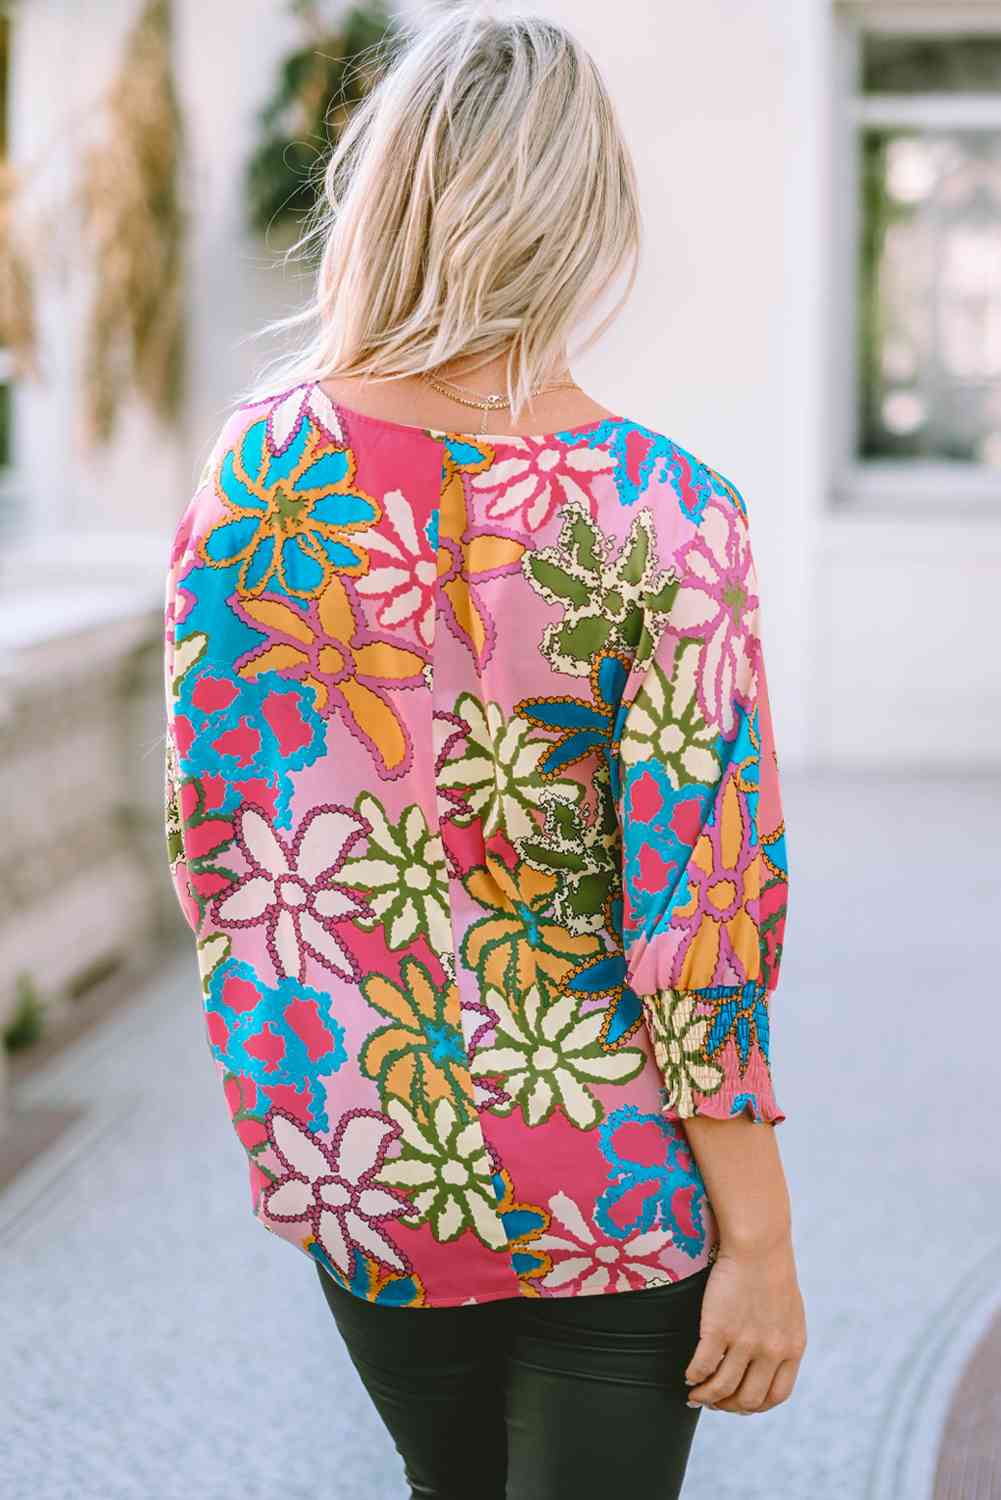 Awesome Job Floral Top